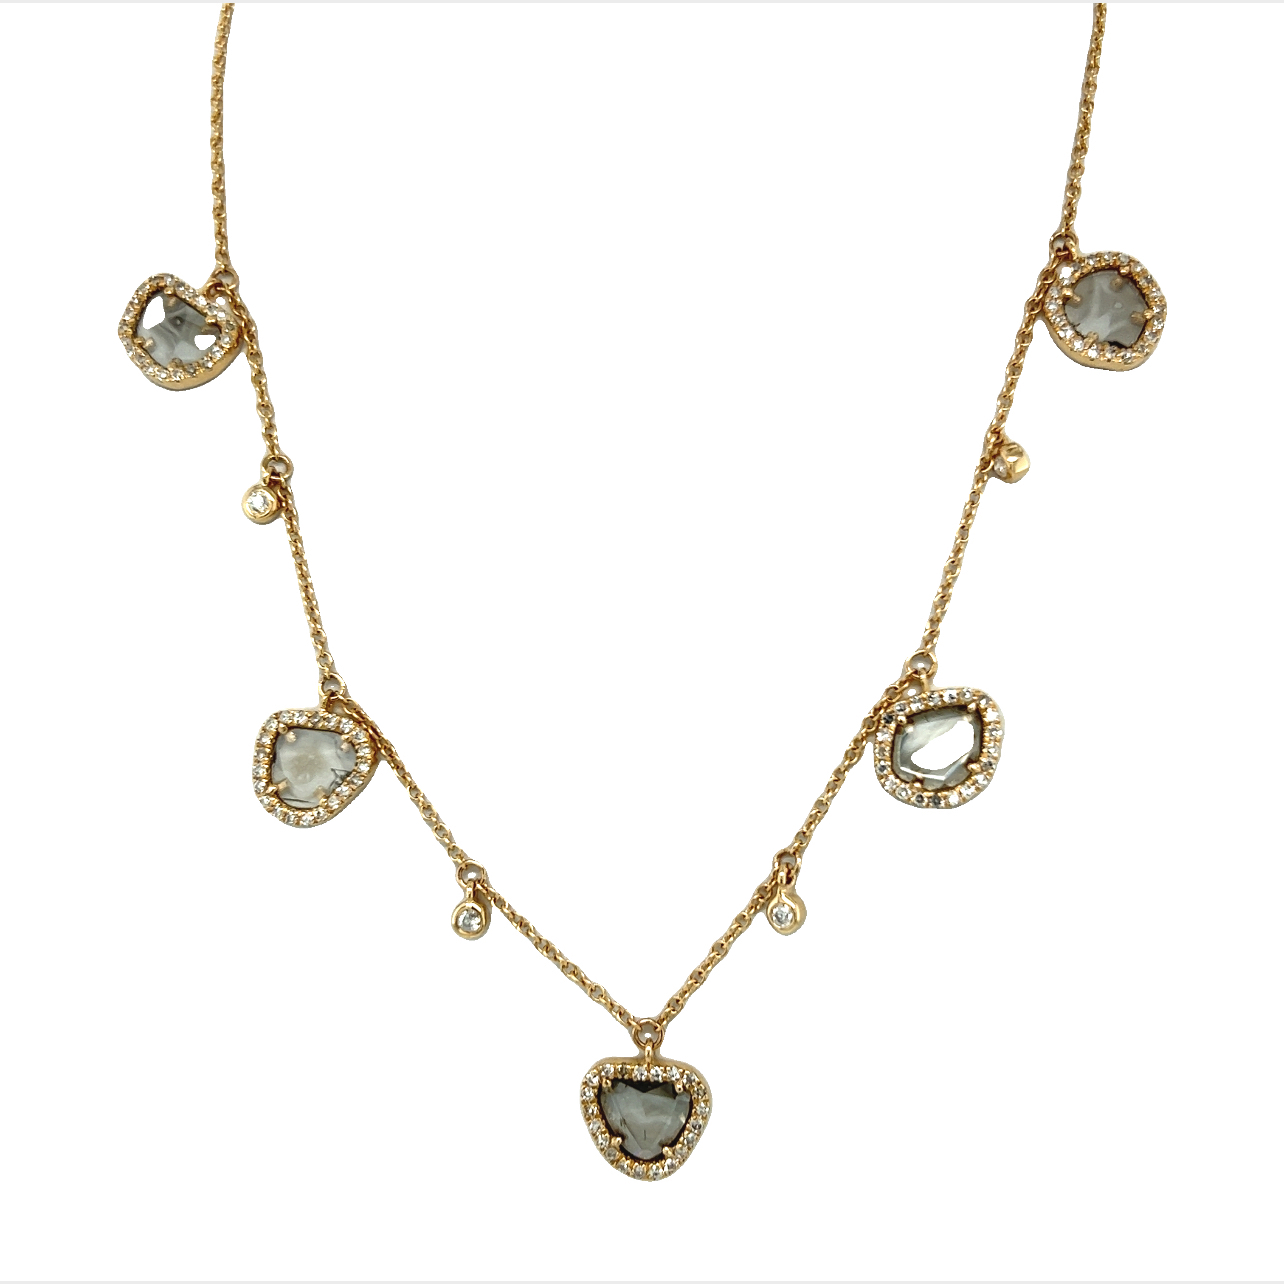 Featured image for “Champagne Diamond 5 Slices and Diamond Bezeled Necklace”